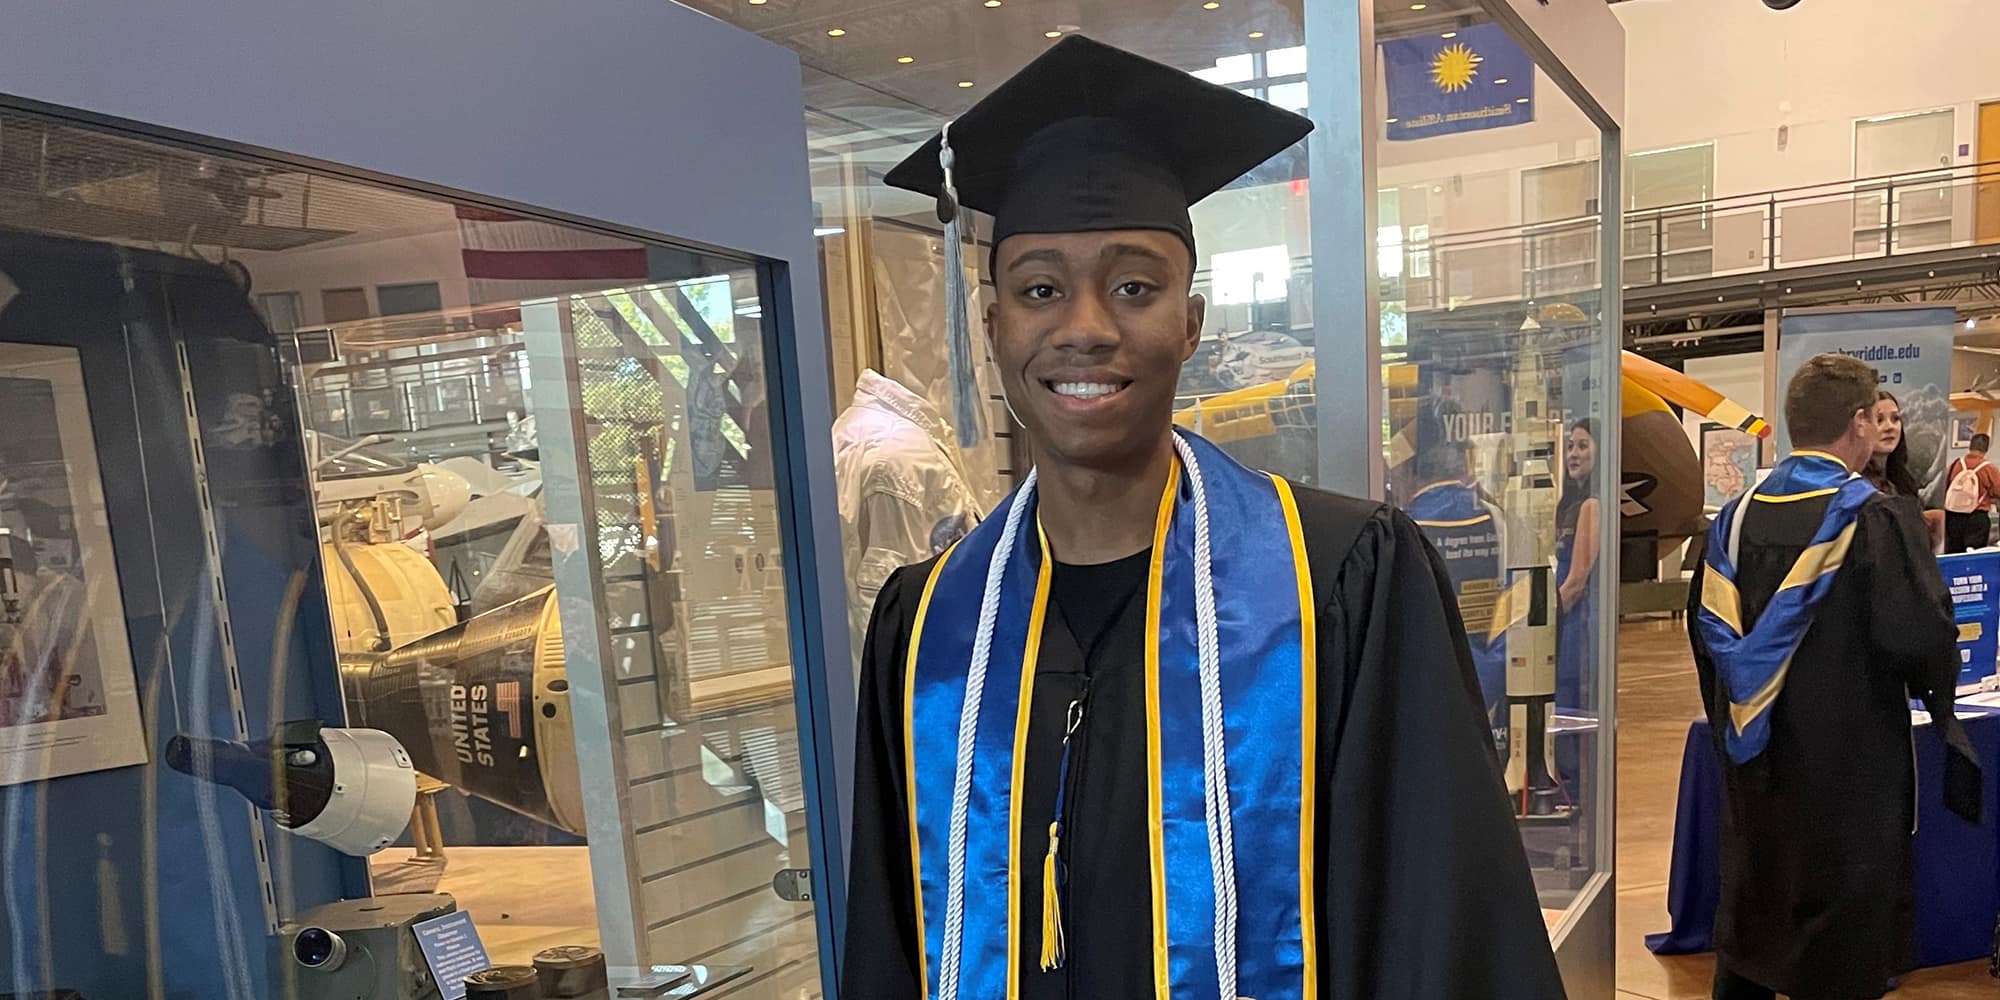 Kegan, a man with dark skin tone, wears a graduation cap and gown, a blue and yellow sash, and white cords.